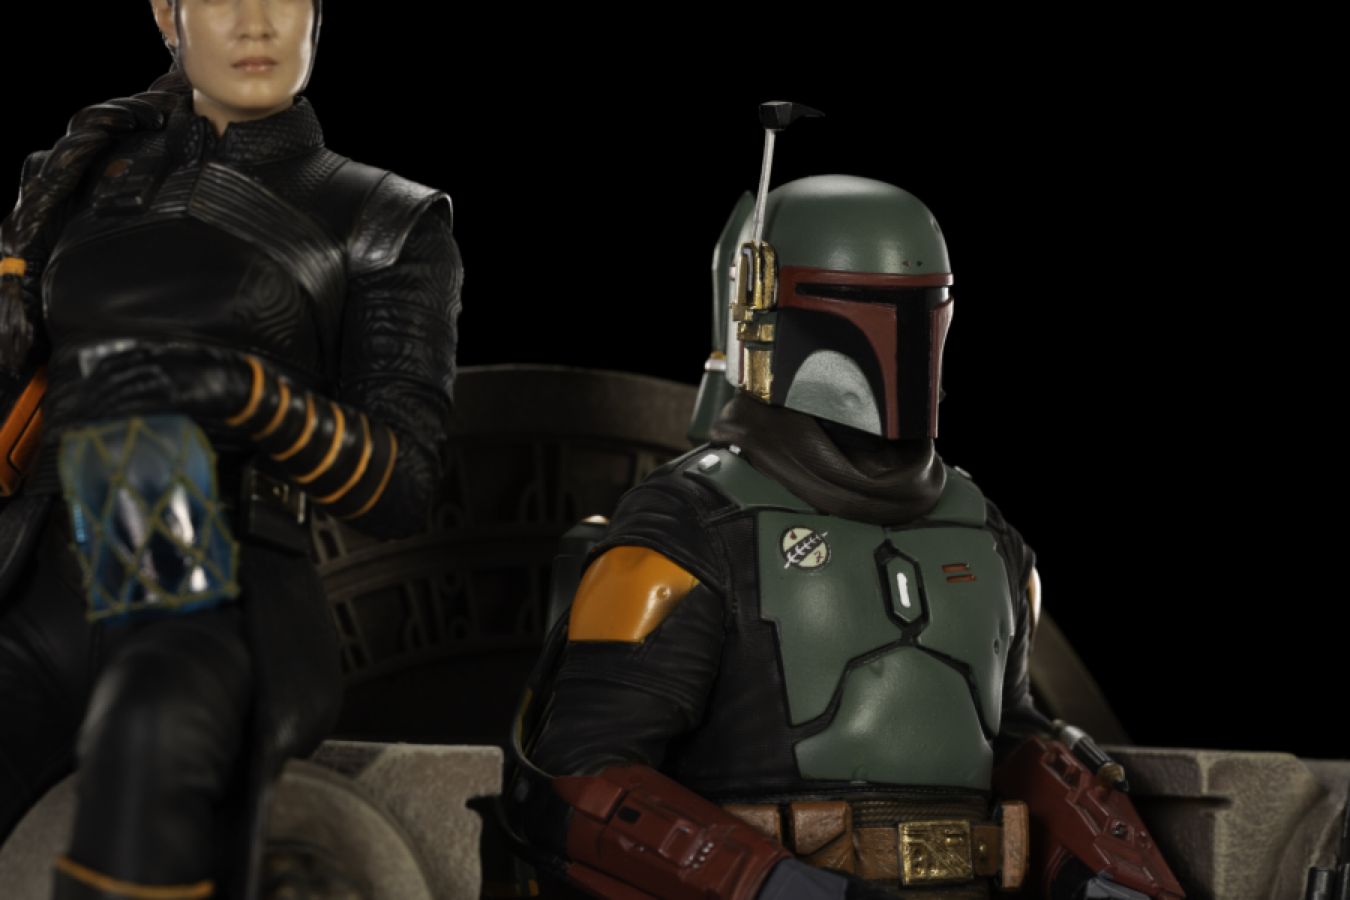 Star Wars: The Mandalorian - Boba Fett & Fennec Shand on Throne Deluxe 1:10 Scale Statue